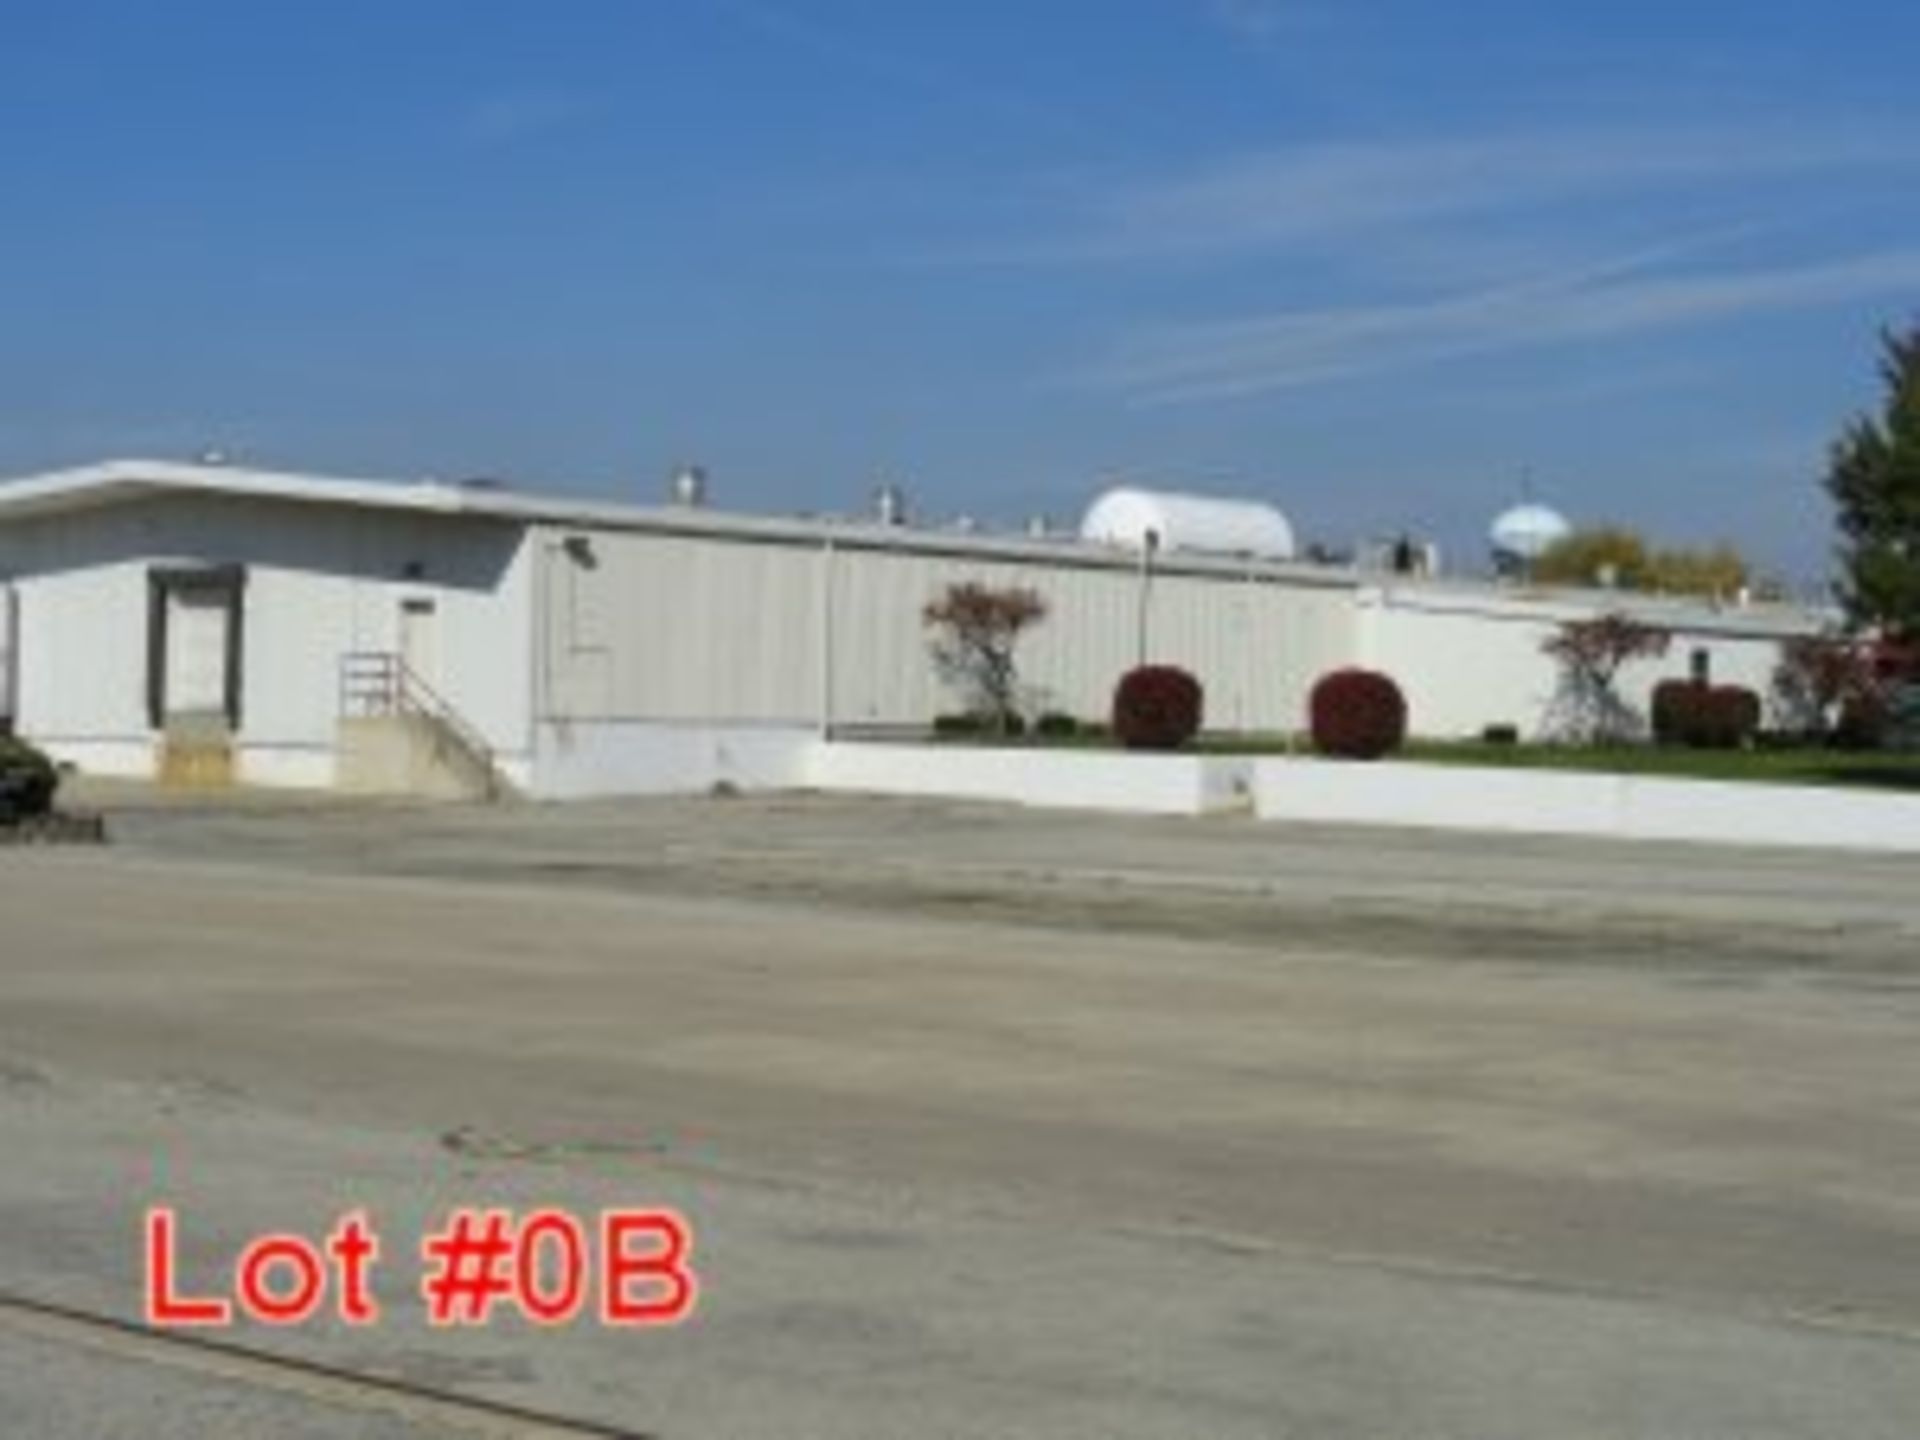 REAL PROPERTY ONLY: HIS LOT INCLUDES THE REAL PROPERTY LOCATED AT 900 NORTH CENTER ST. VERSAILLES OH - Image 3 of 6